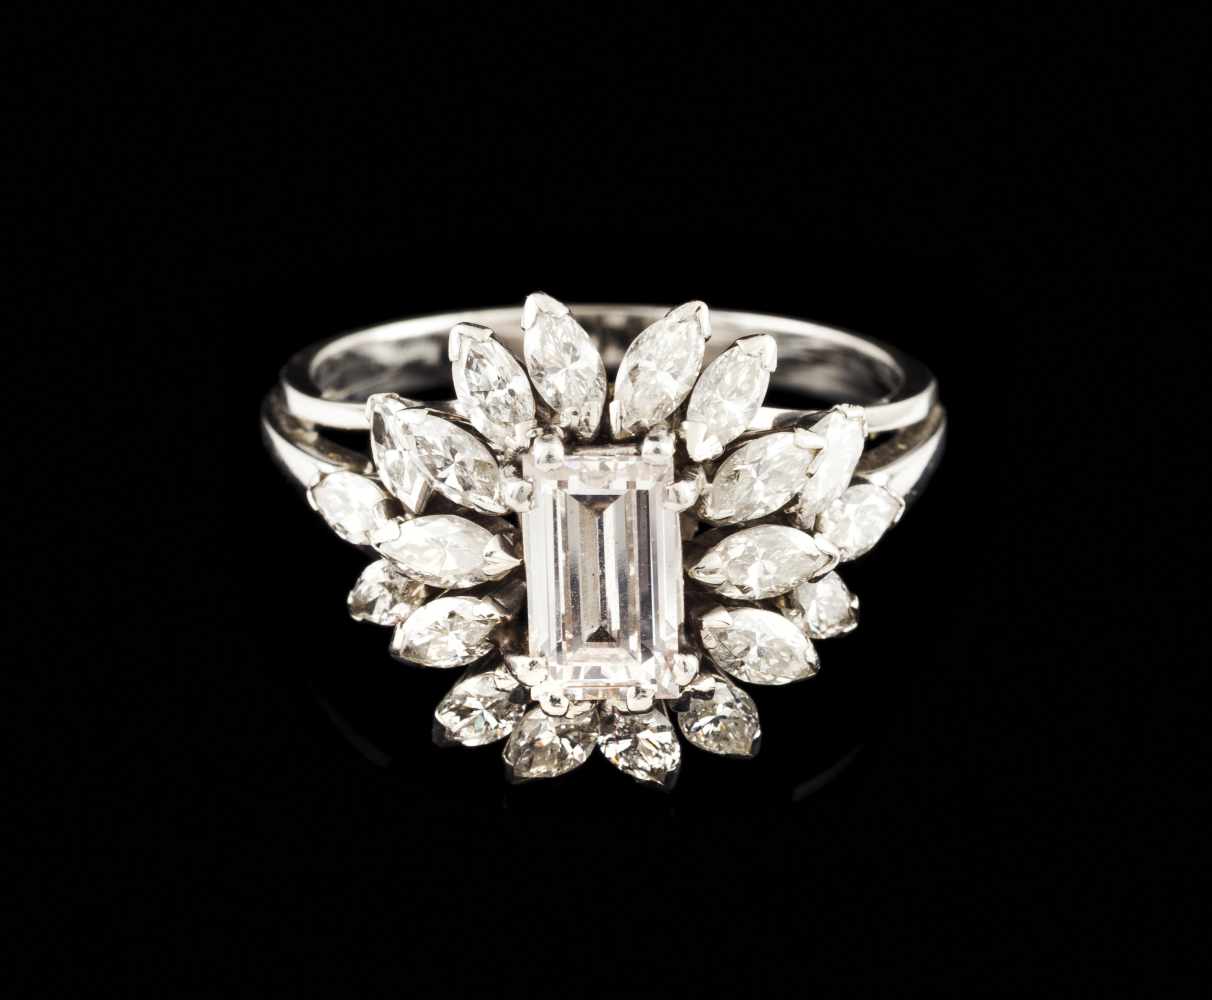 A ringGold Triple band of flower top set with baguette cut diamond (ca.0.80ct) and 19 marquise cut